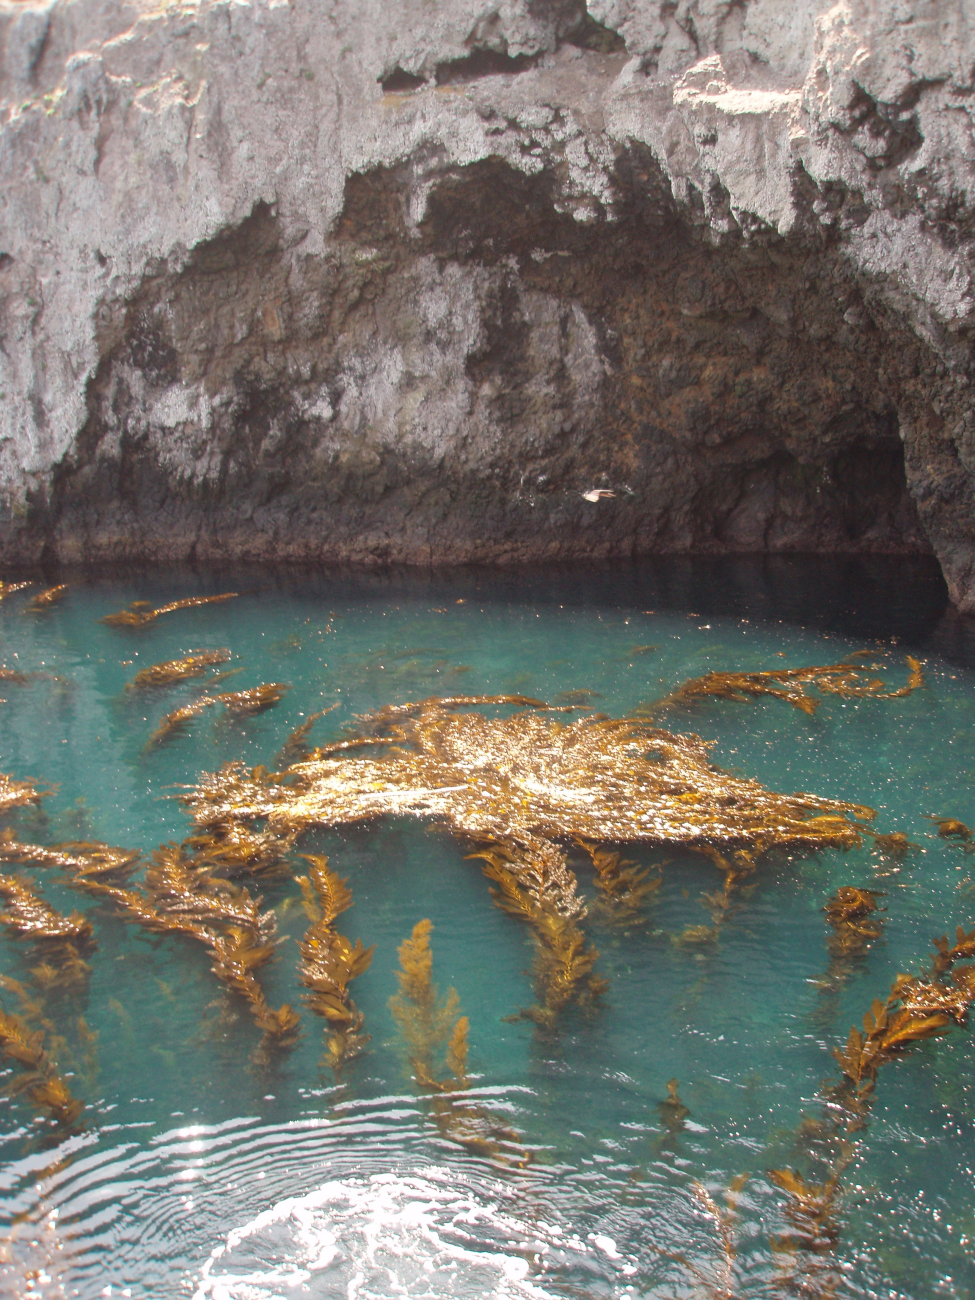 A giant kelp forest in the Anacapa Island Landing Cove